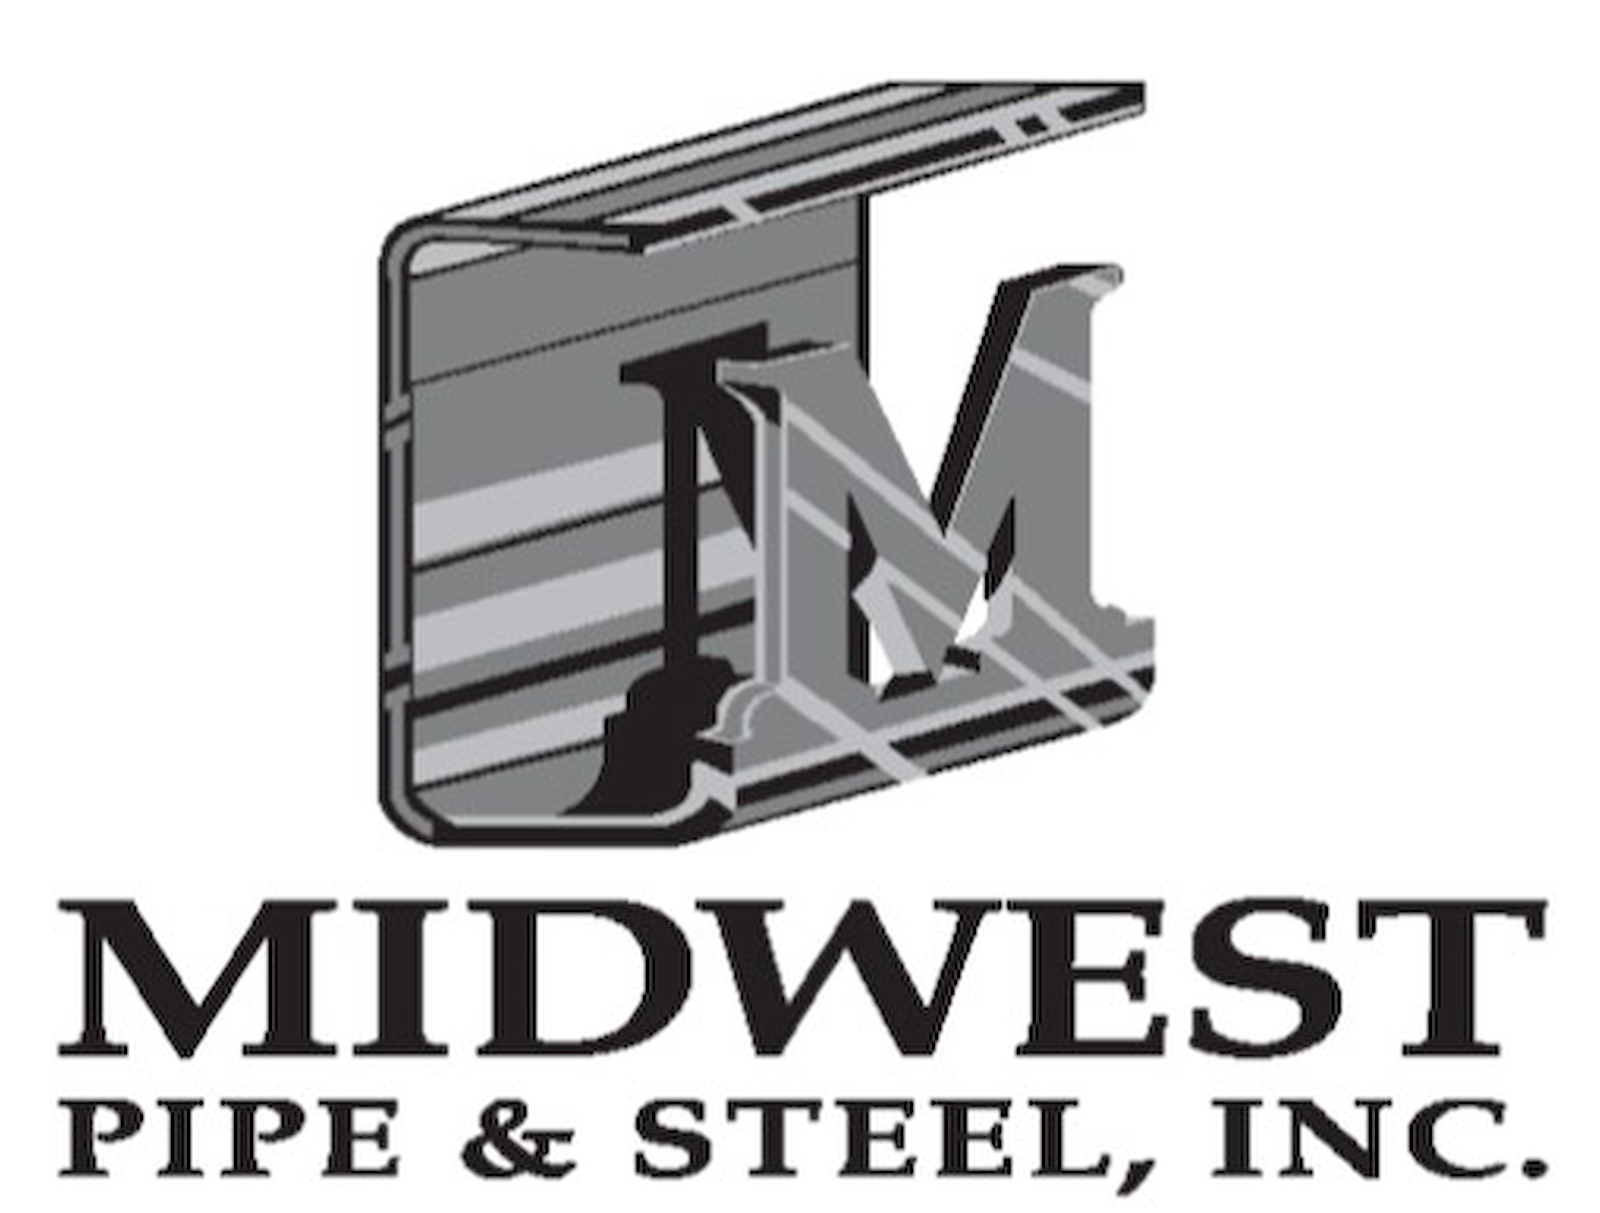 MIDWEST PIPE & STEEL, INC.